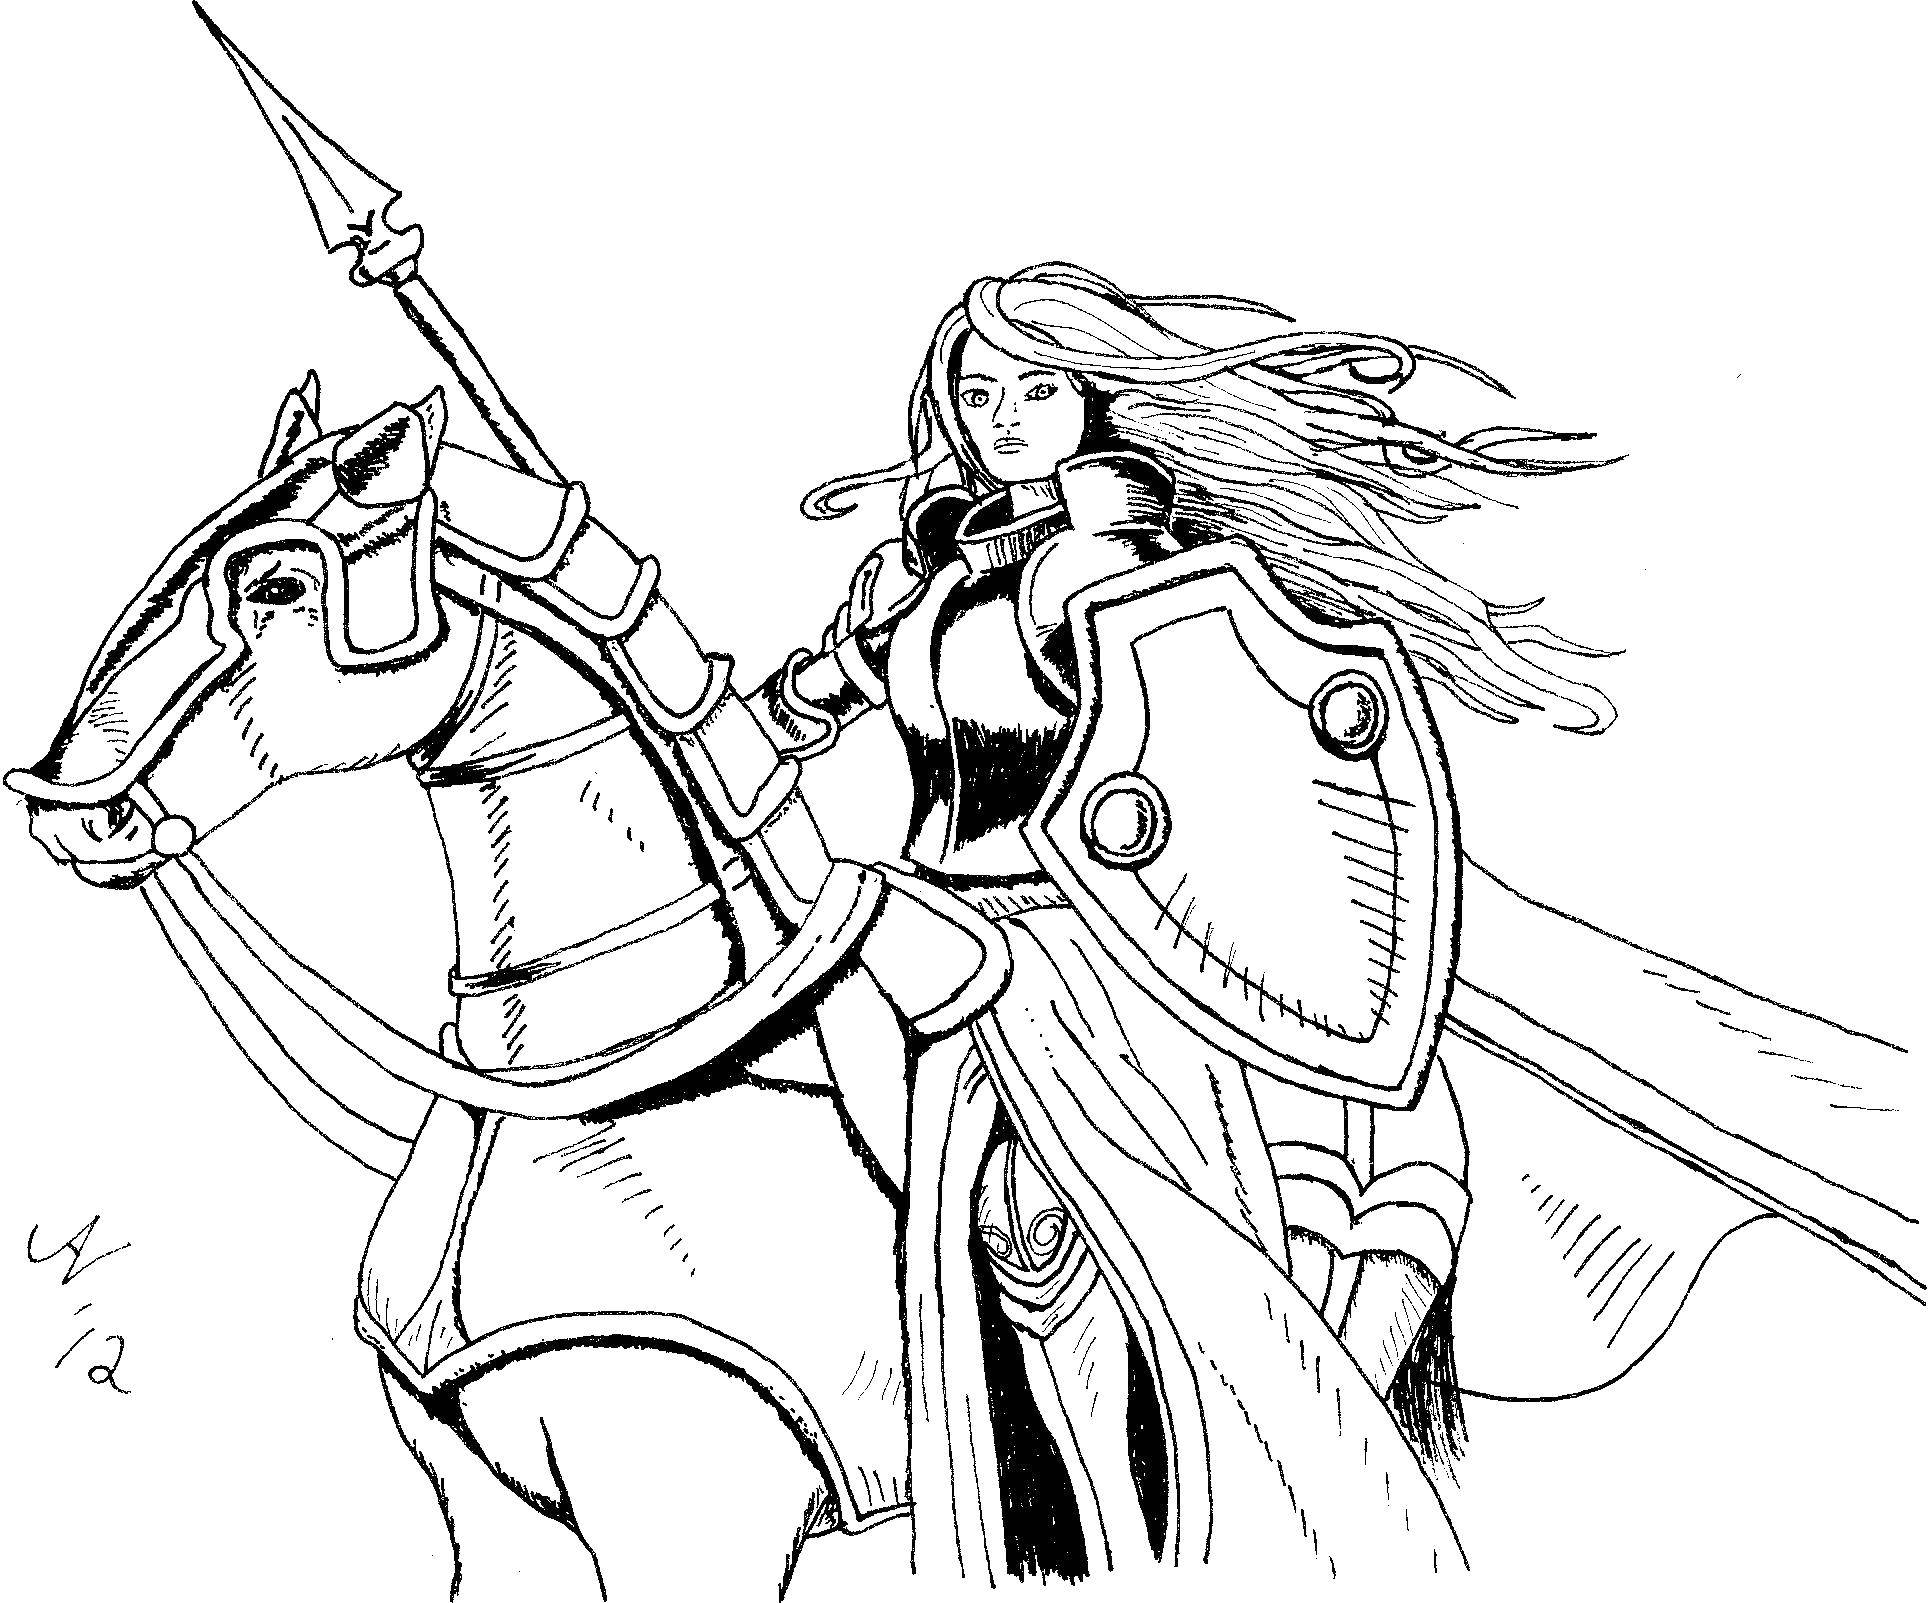 Online Coloring Pages Coloring Page Elf On Horseback Lord Of The Rings Coloring Pages For Kids